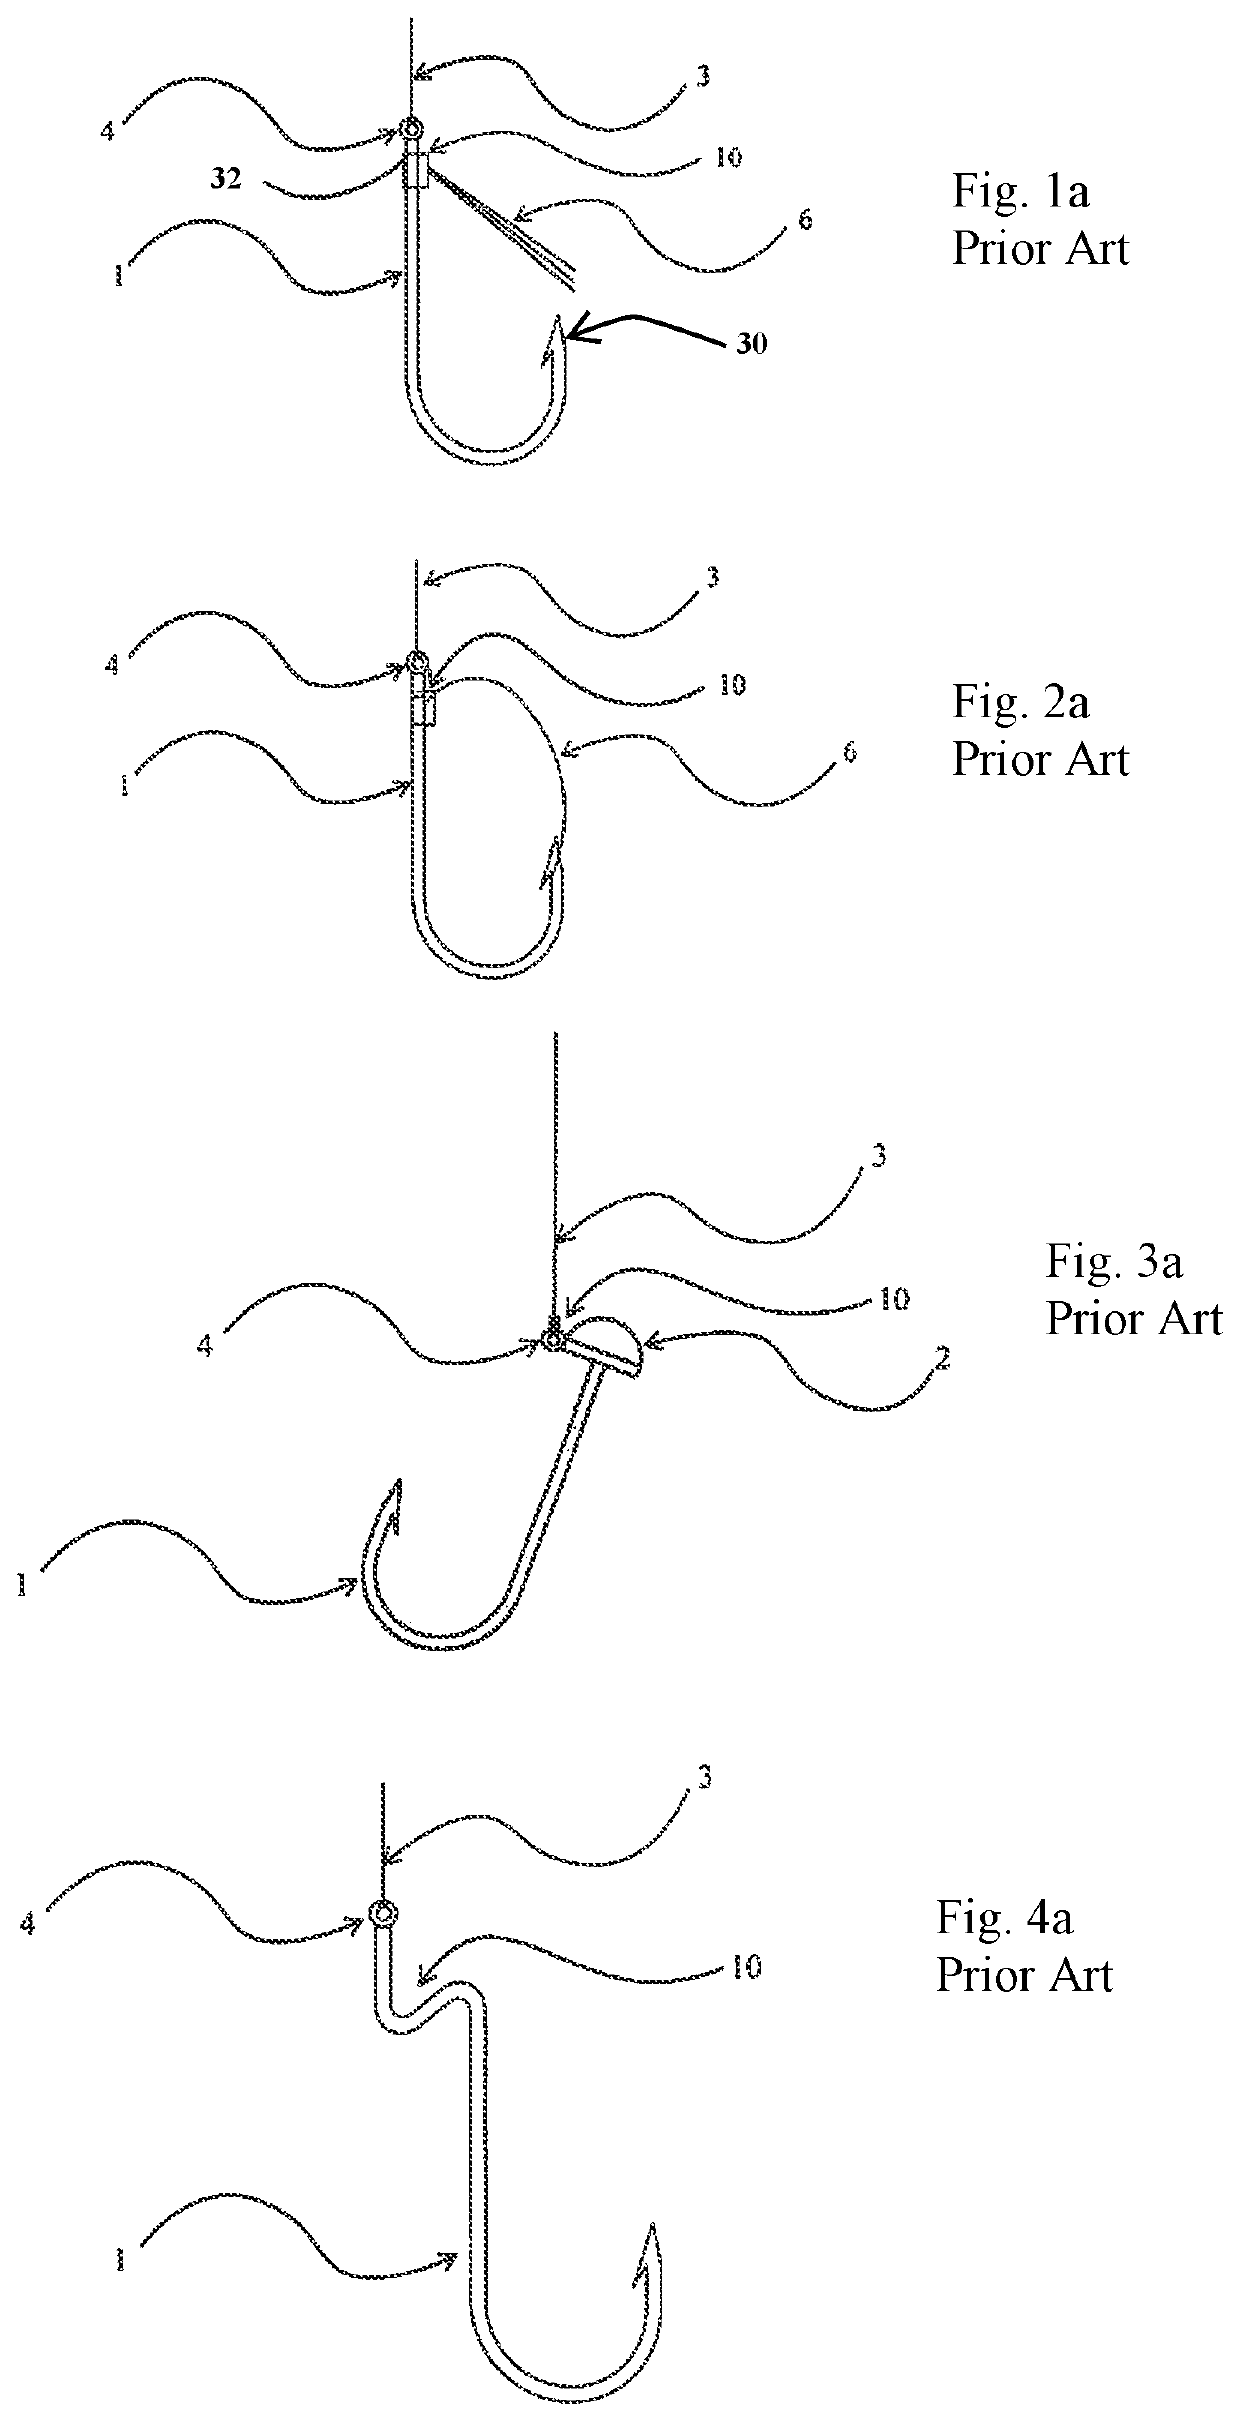 Snag-free fish hook assembly, kit, and method